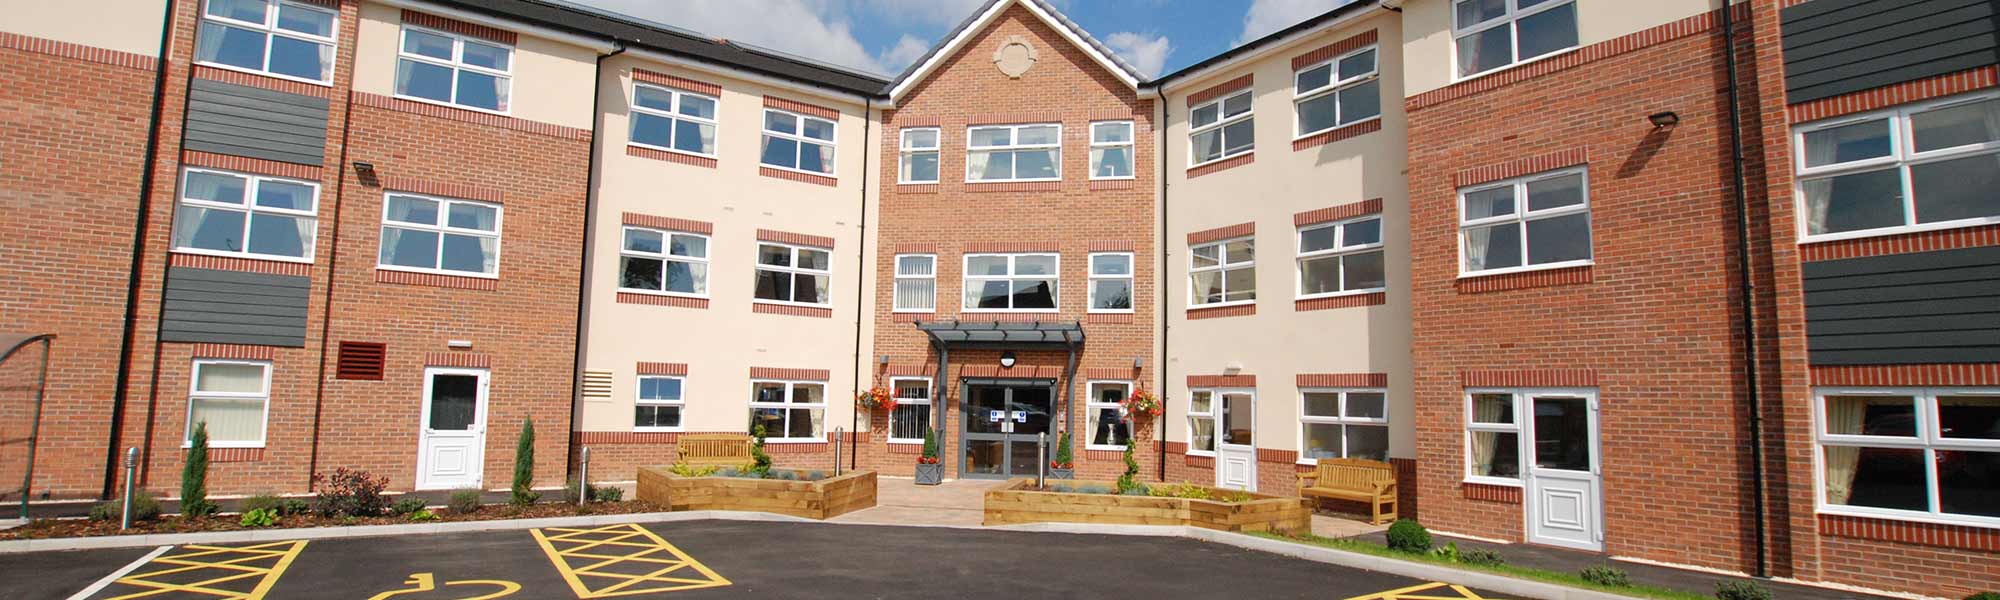 Residential care home in Hinckley